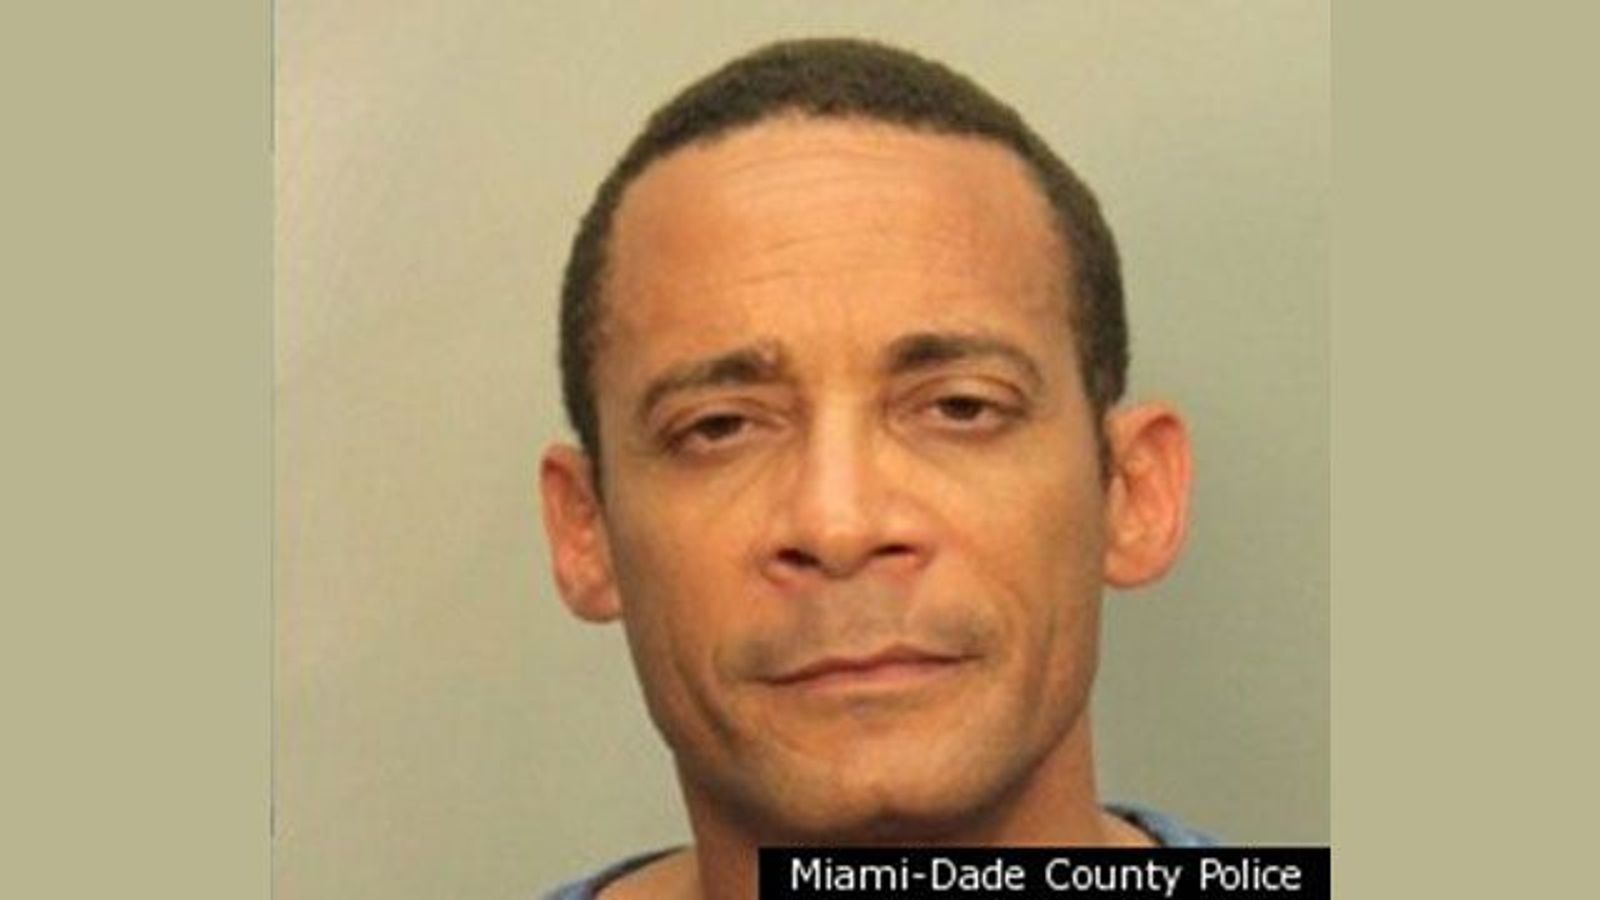 FL Performer Ramon Pleads Guilty to 21 Counts Animal Cruelty